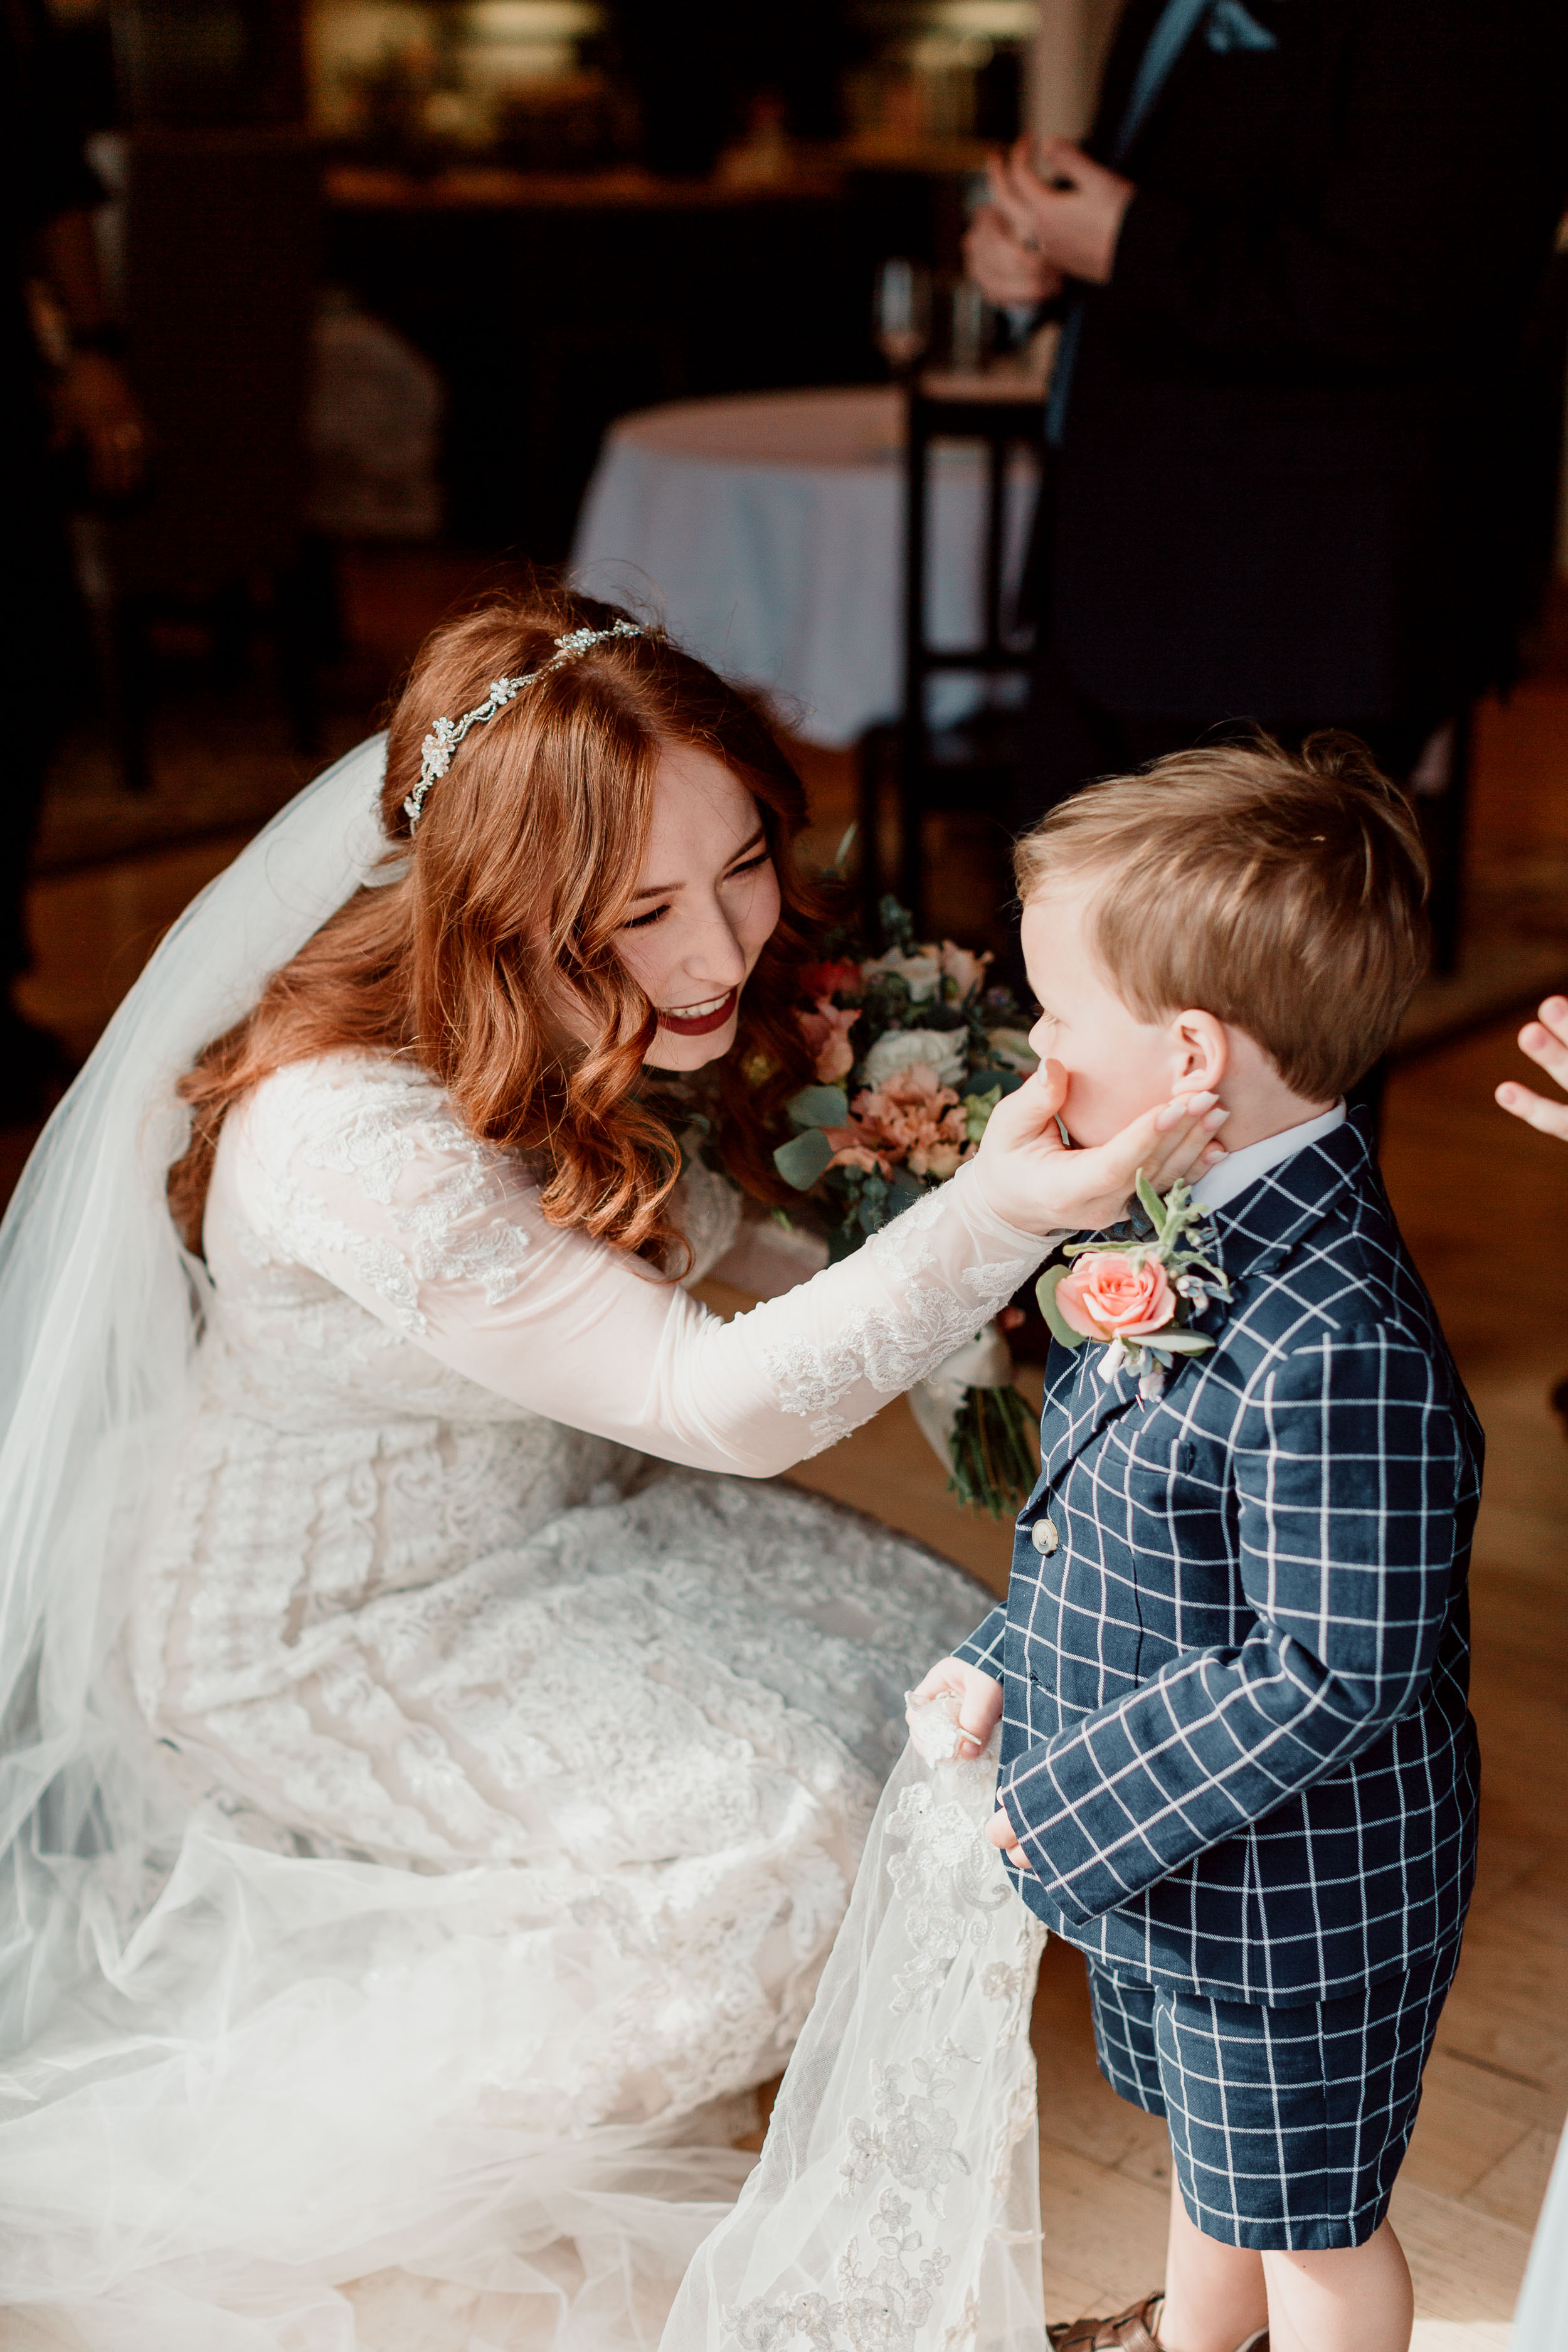 Bride and ring bearer before wedding ceremony | Galena Illinois Airbnb Wedding | Wedding Photographer | Eagle Ridge Galena Wedding | Outdoor Wedding Inspiration | Small Intimate Elopement Wedding